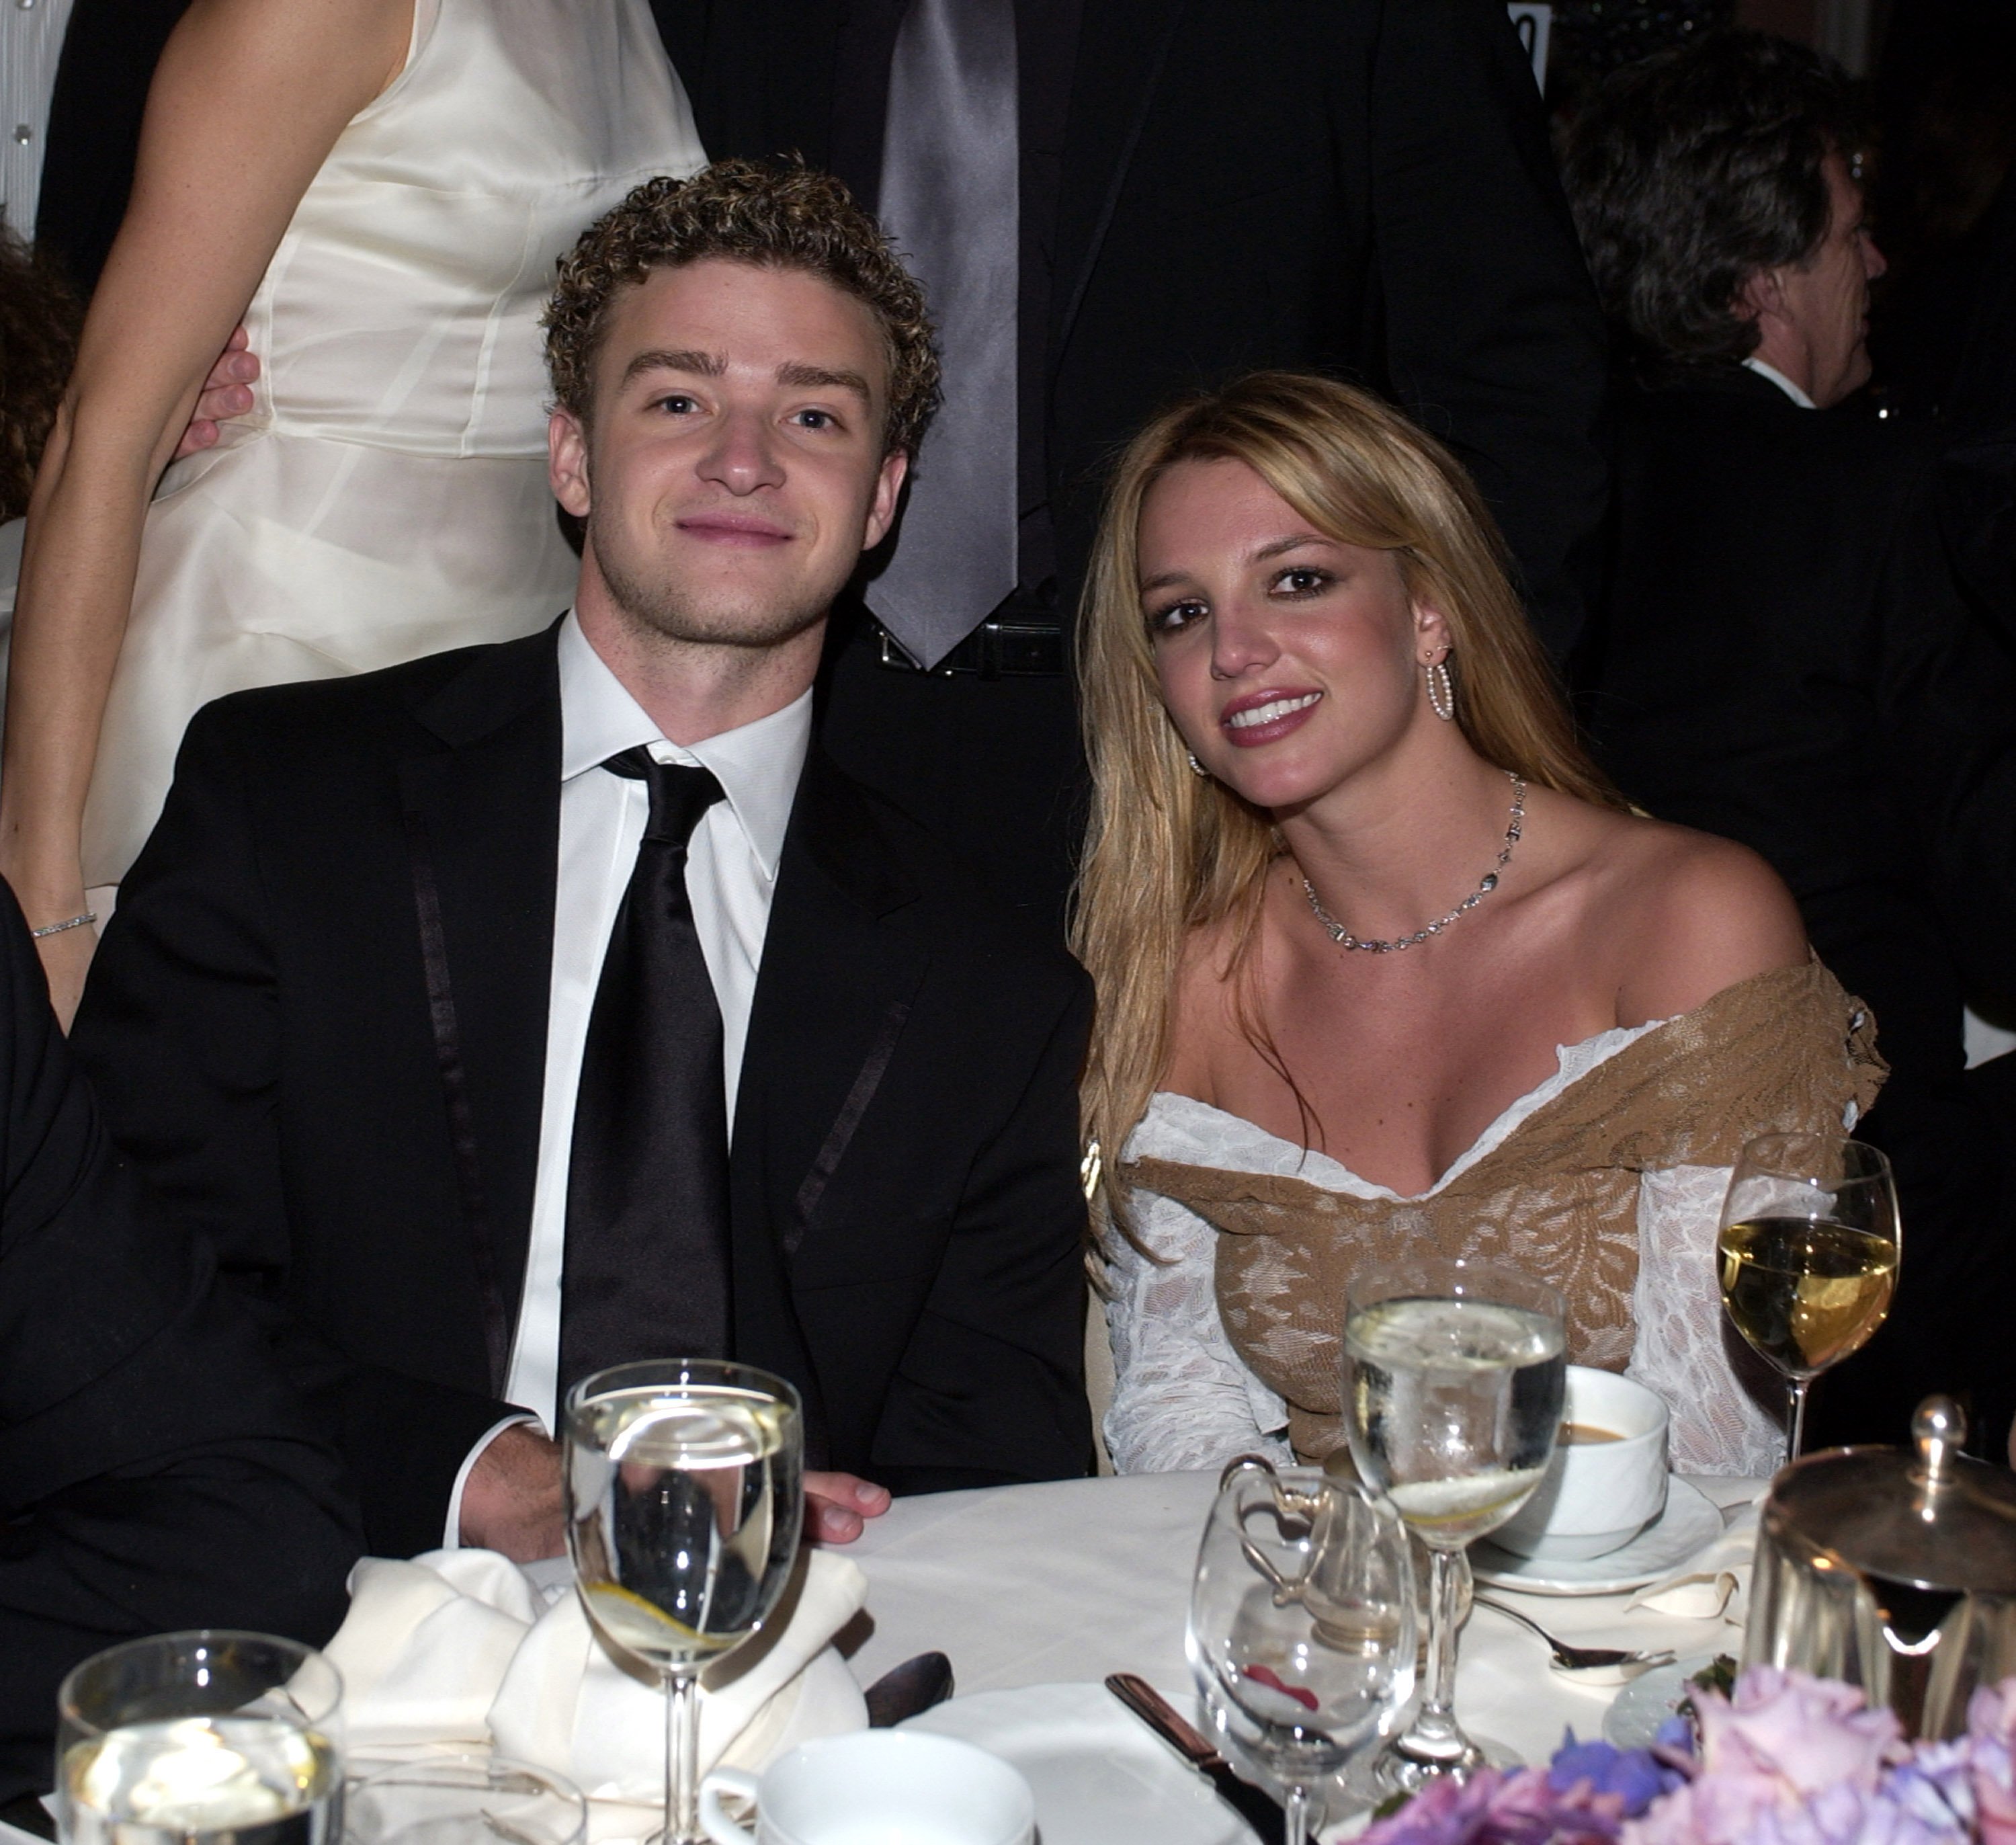 Justin Timberlake and Britney Spears at the Beverly Hills Hotel